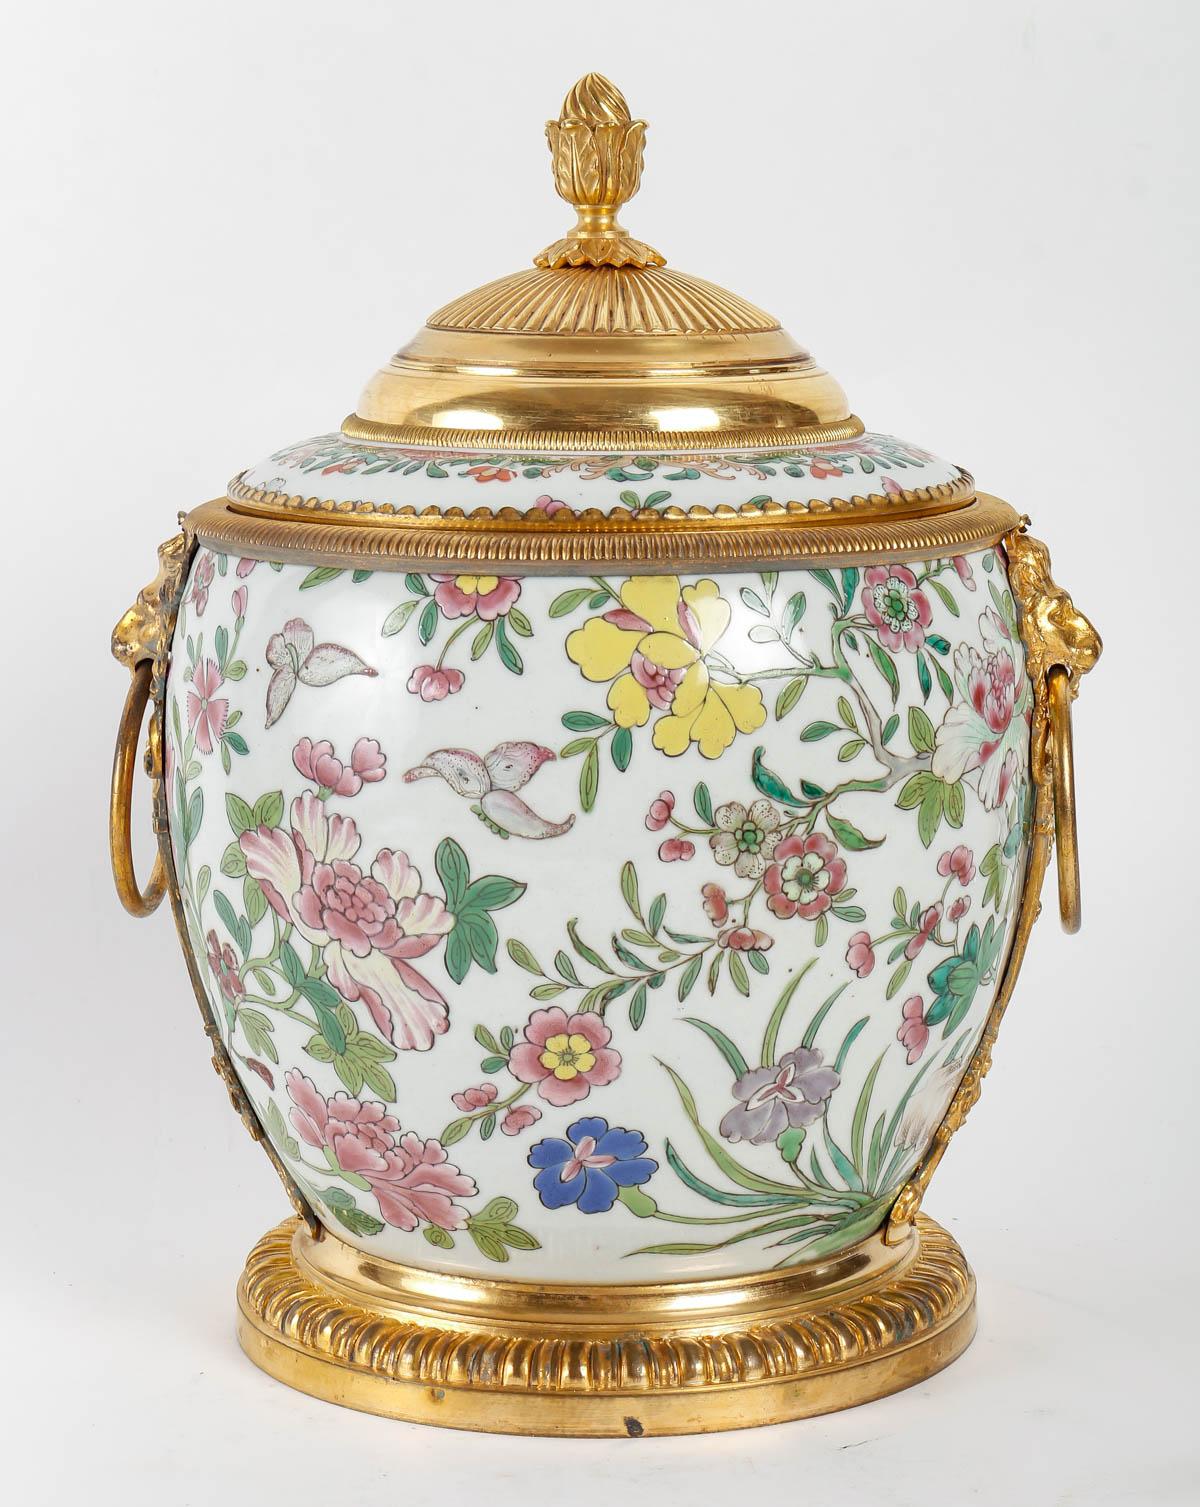 Gilt  A French Regence Style Ormolu-Mounted Chinese Porcelain Pair of Ginger Jar